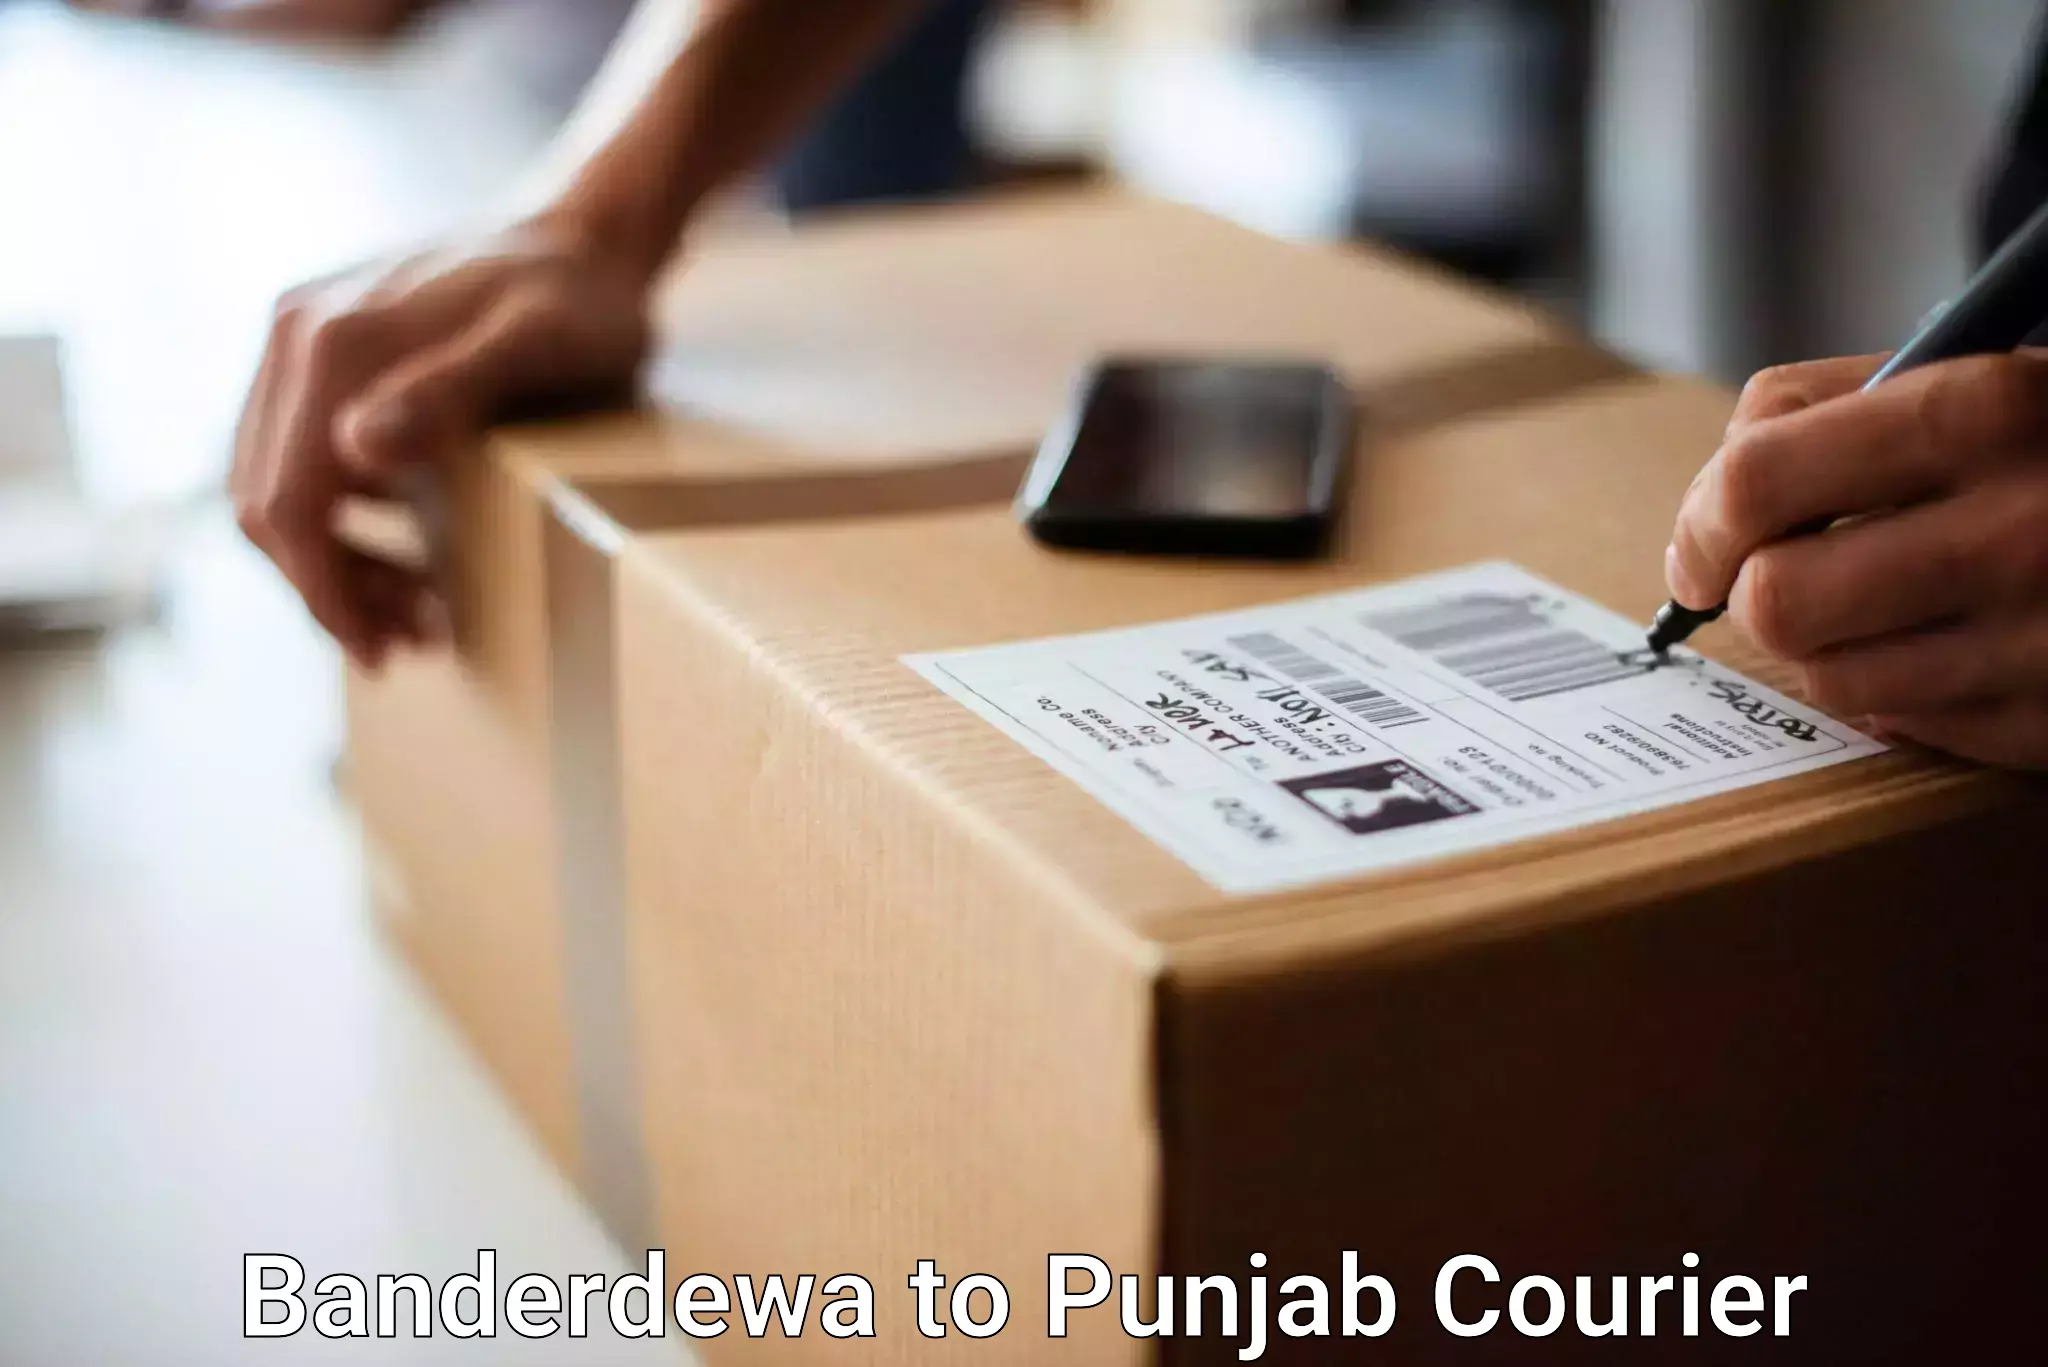 Baggage delivery support Banderdewa to Punjab